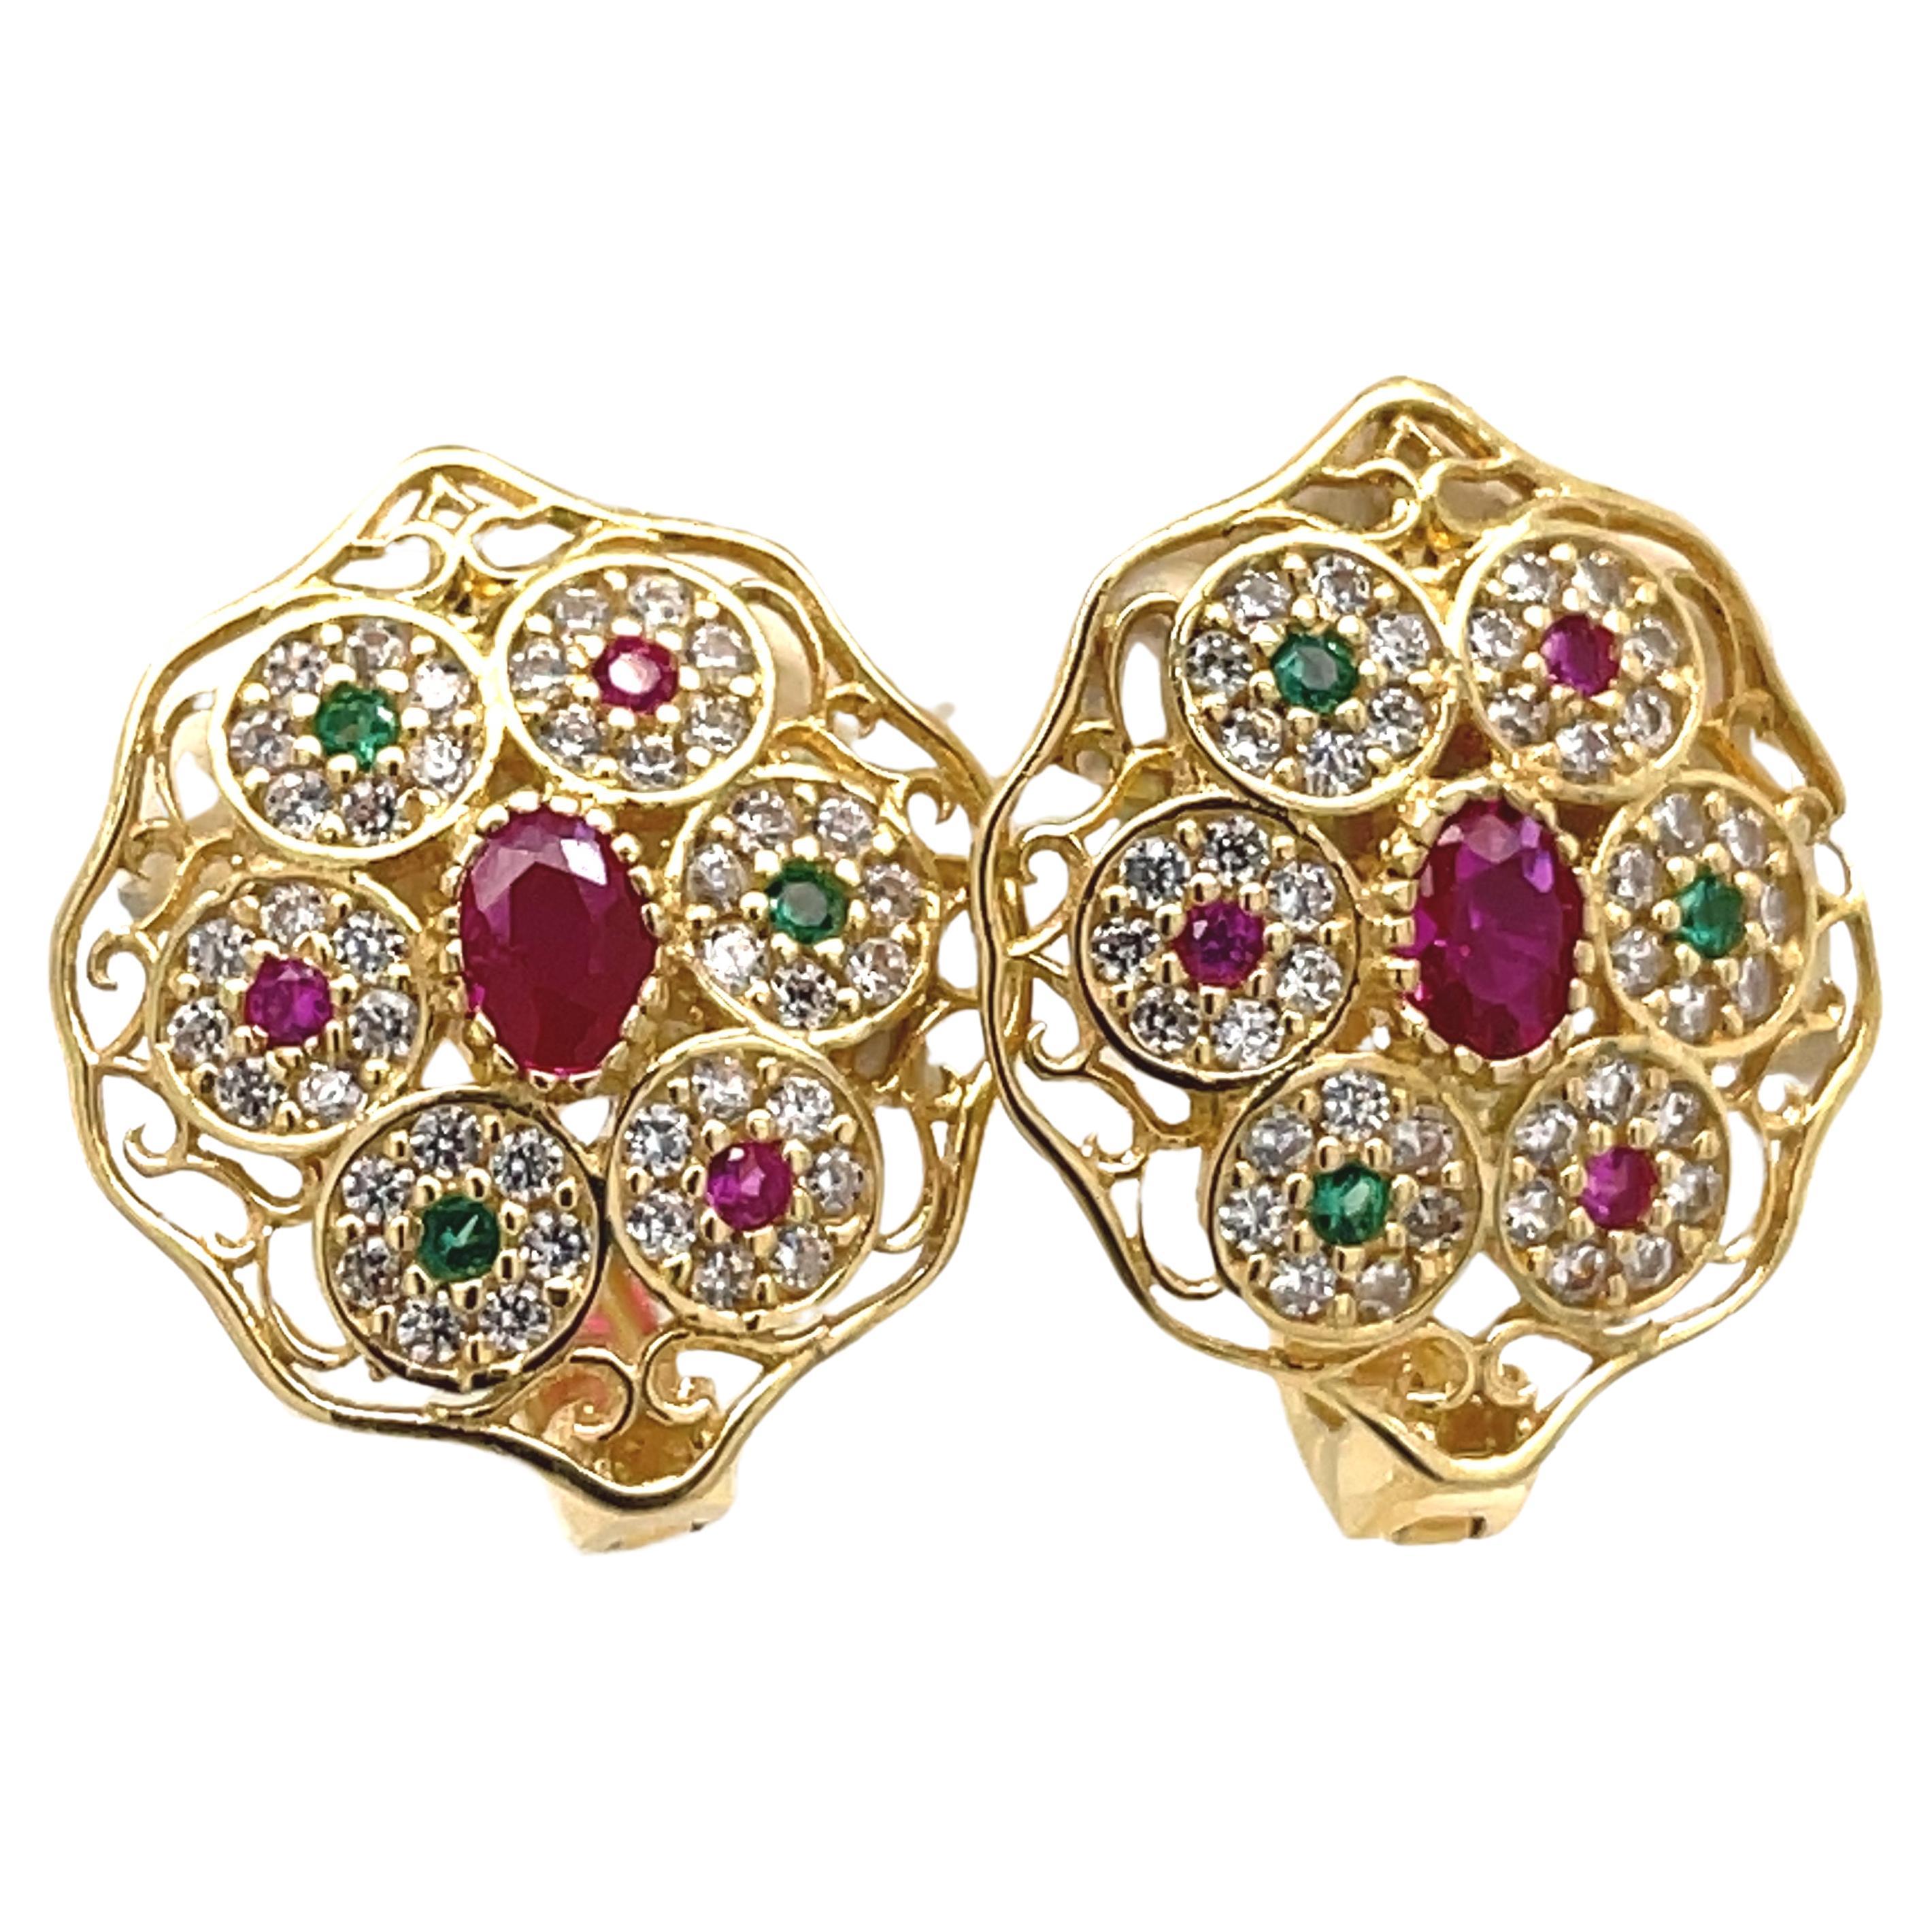 Vintage Art Deco Earrings- 18k Yellow Gold Oval+Round Multi-Color Cubic Zirconia For Sale